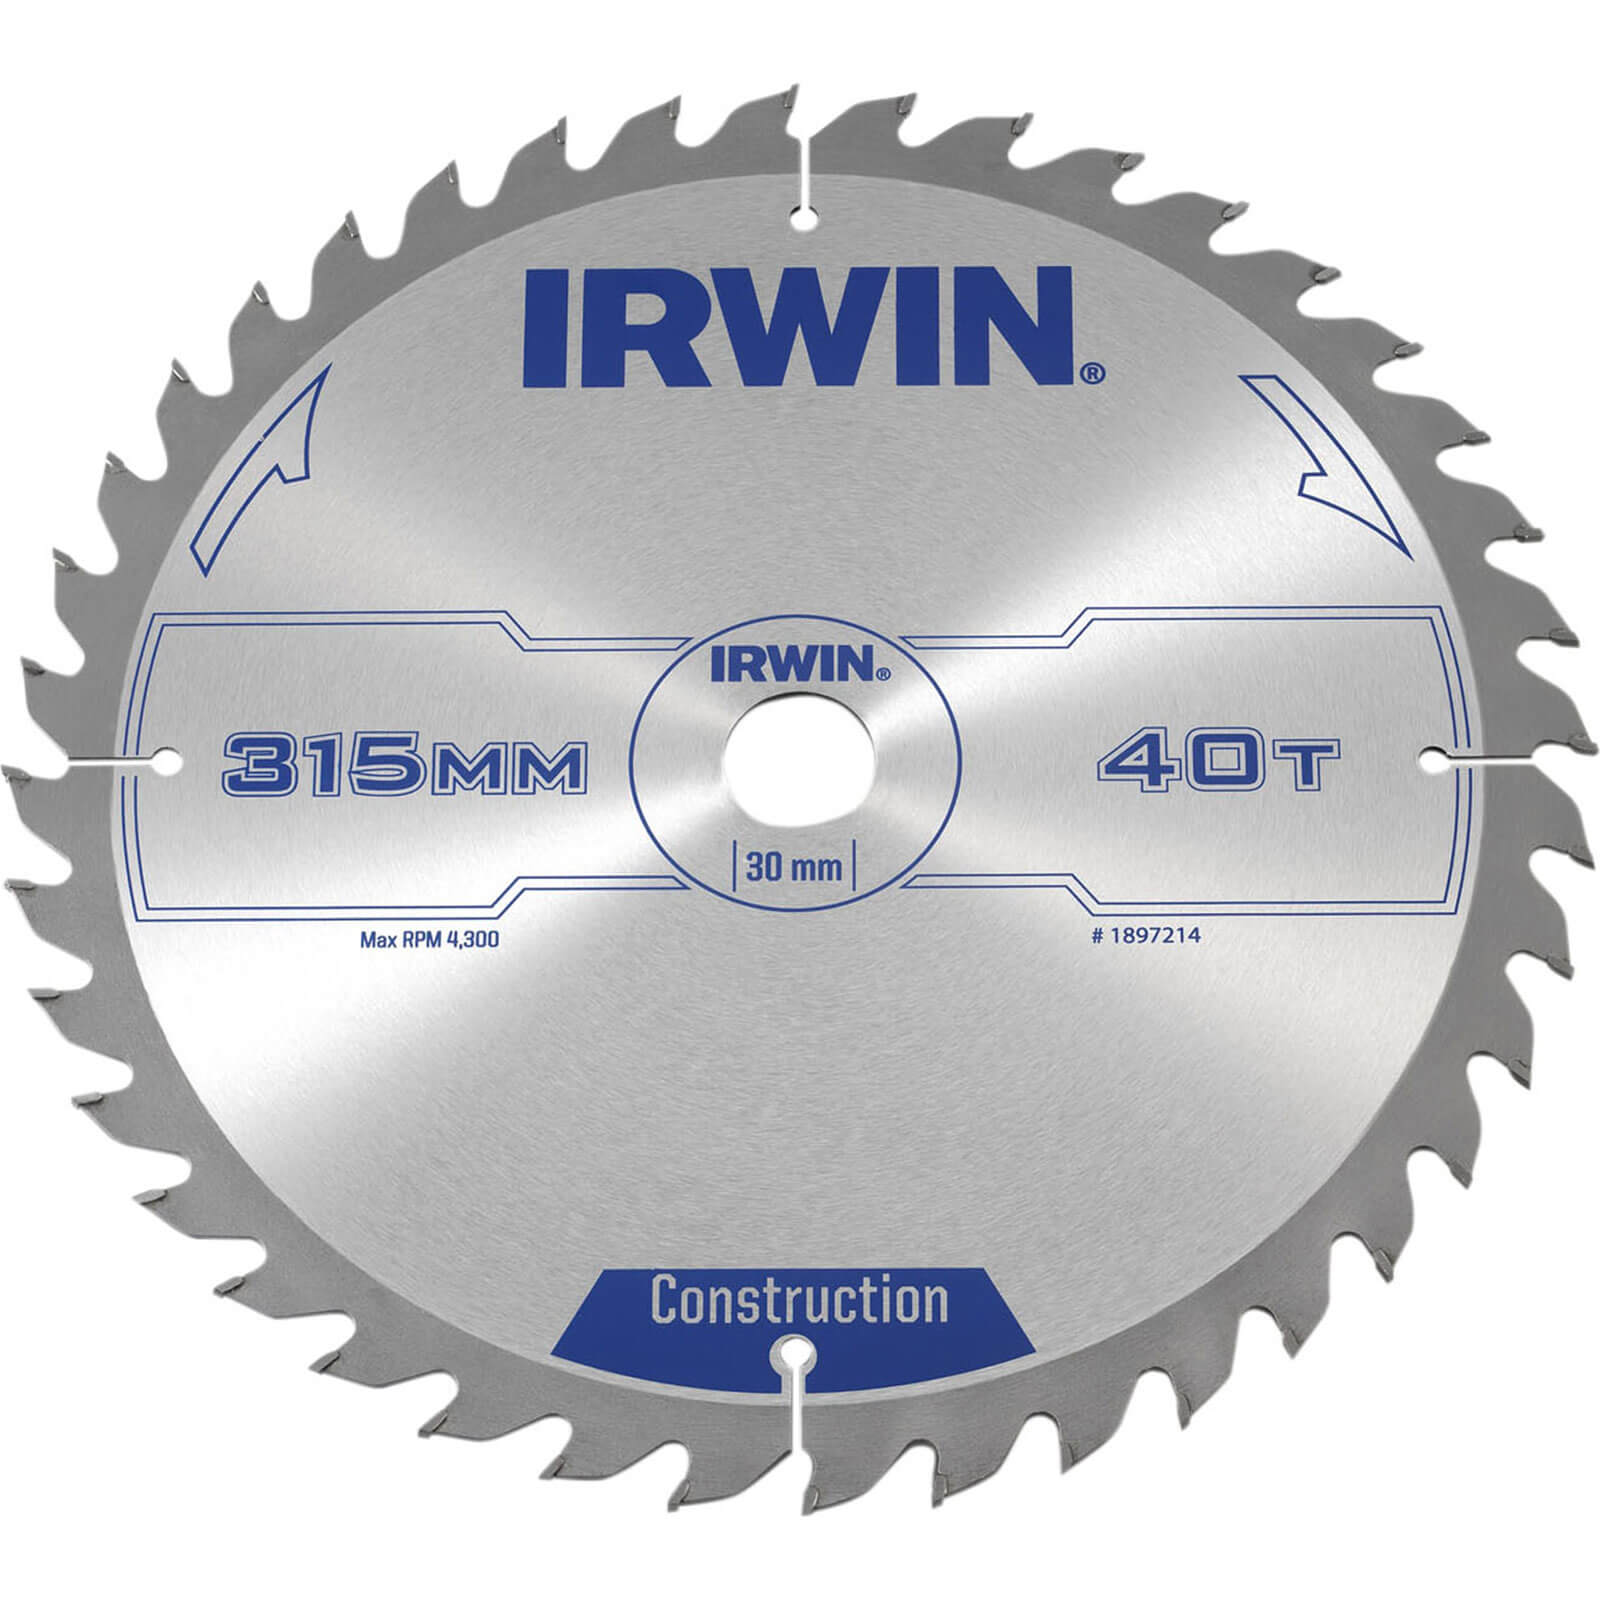 Image of Irwin ATB Construction Circular Saw Blade 315mm 40T 30mm